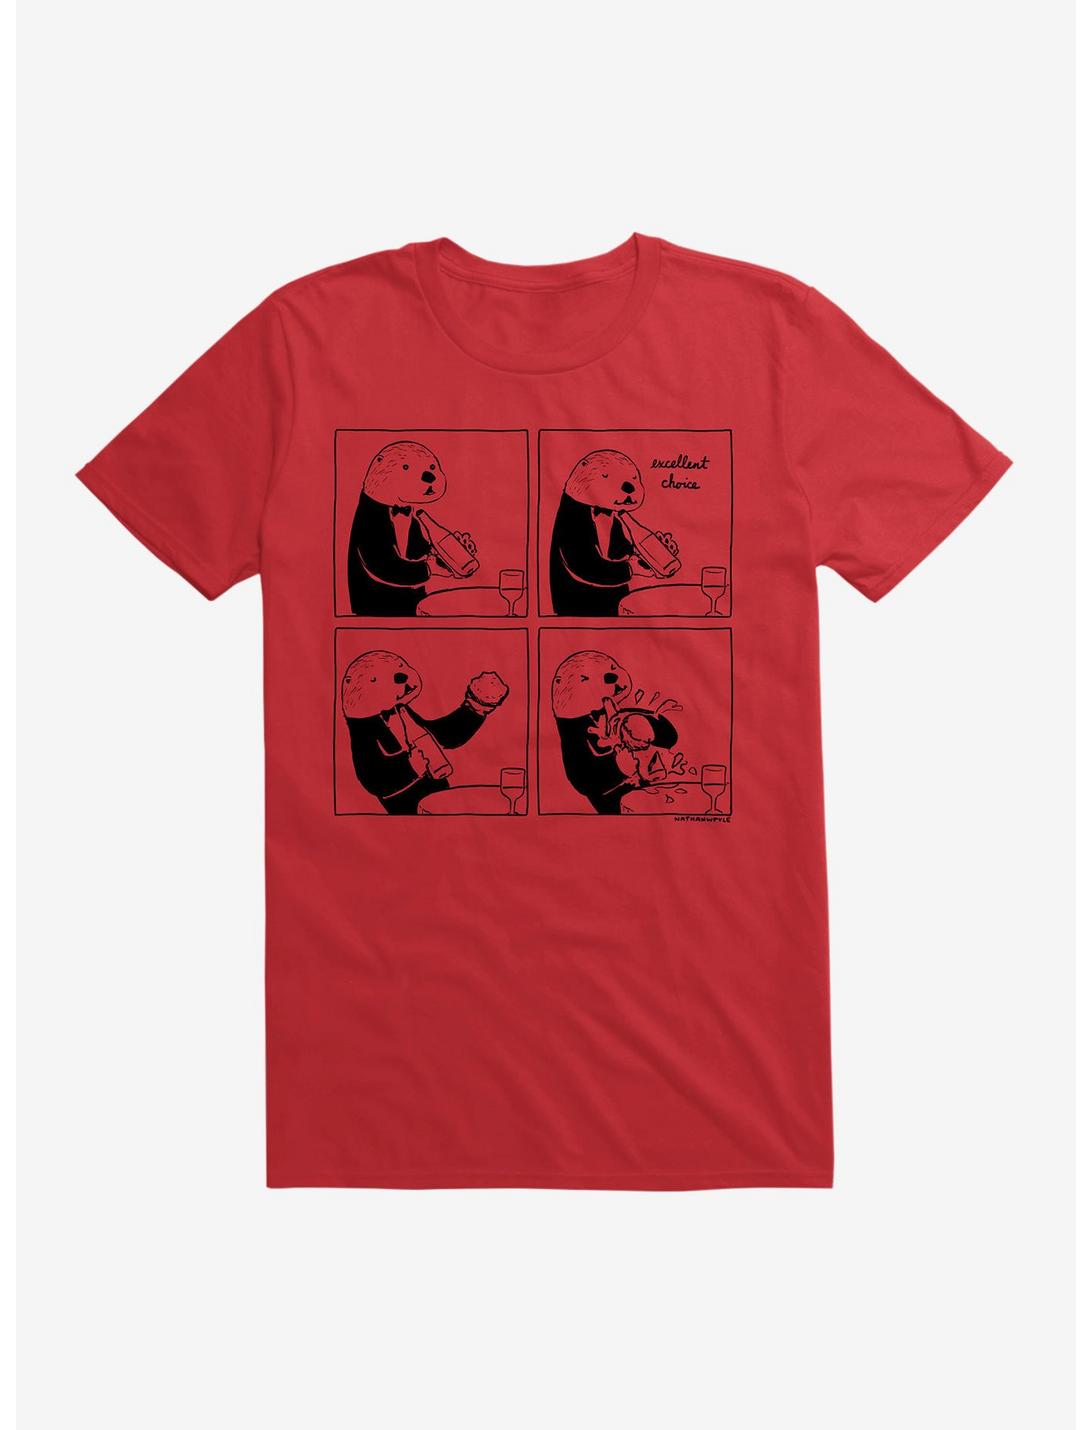 Excellent Choice Otter T-Shirt, RED, hi-res